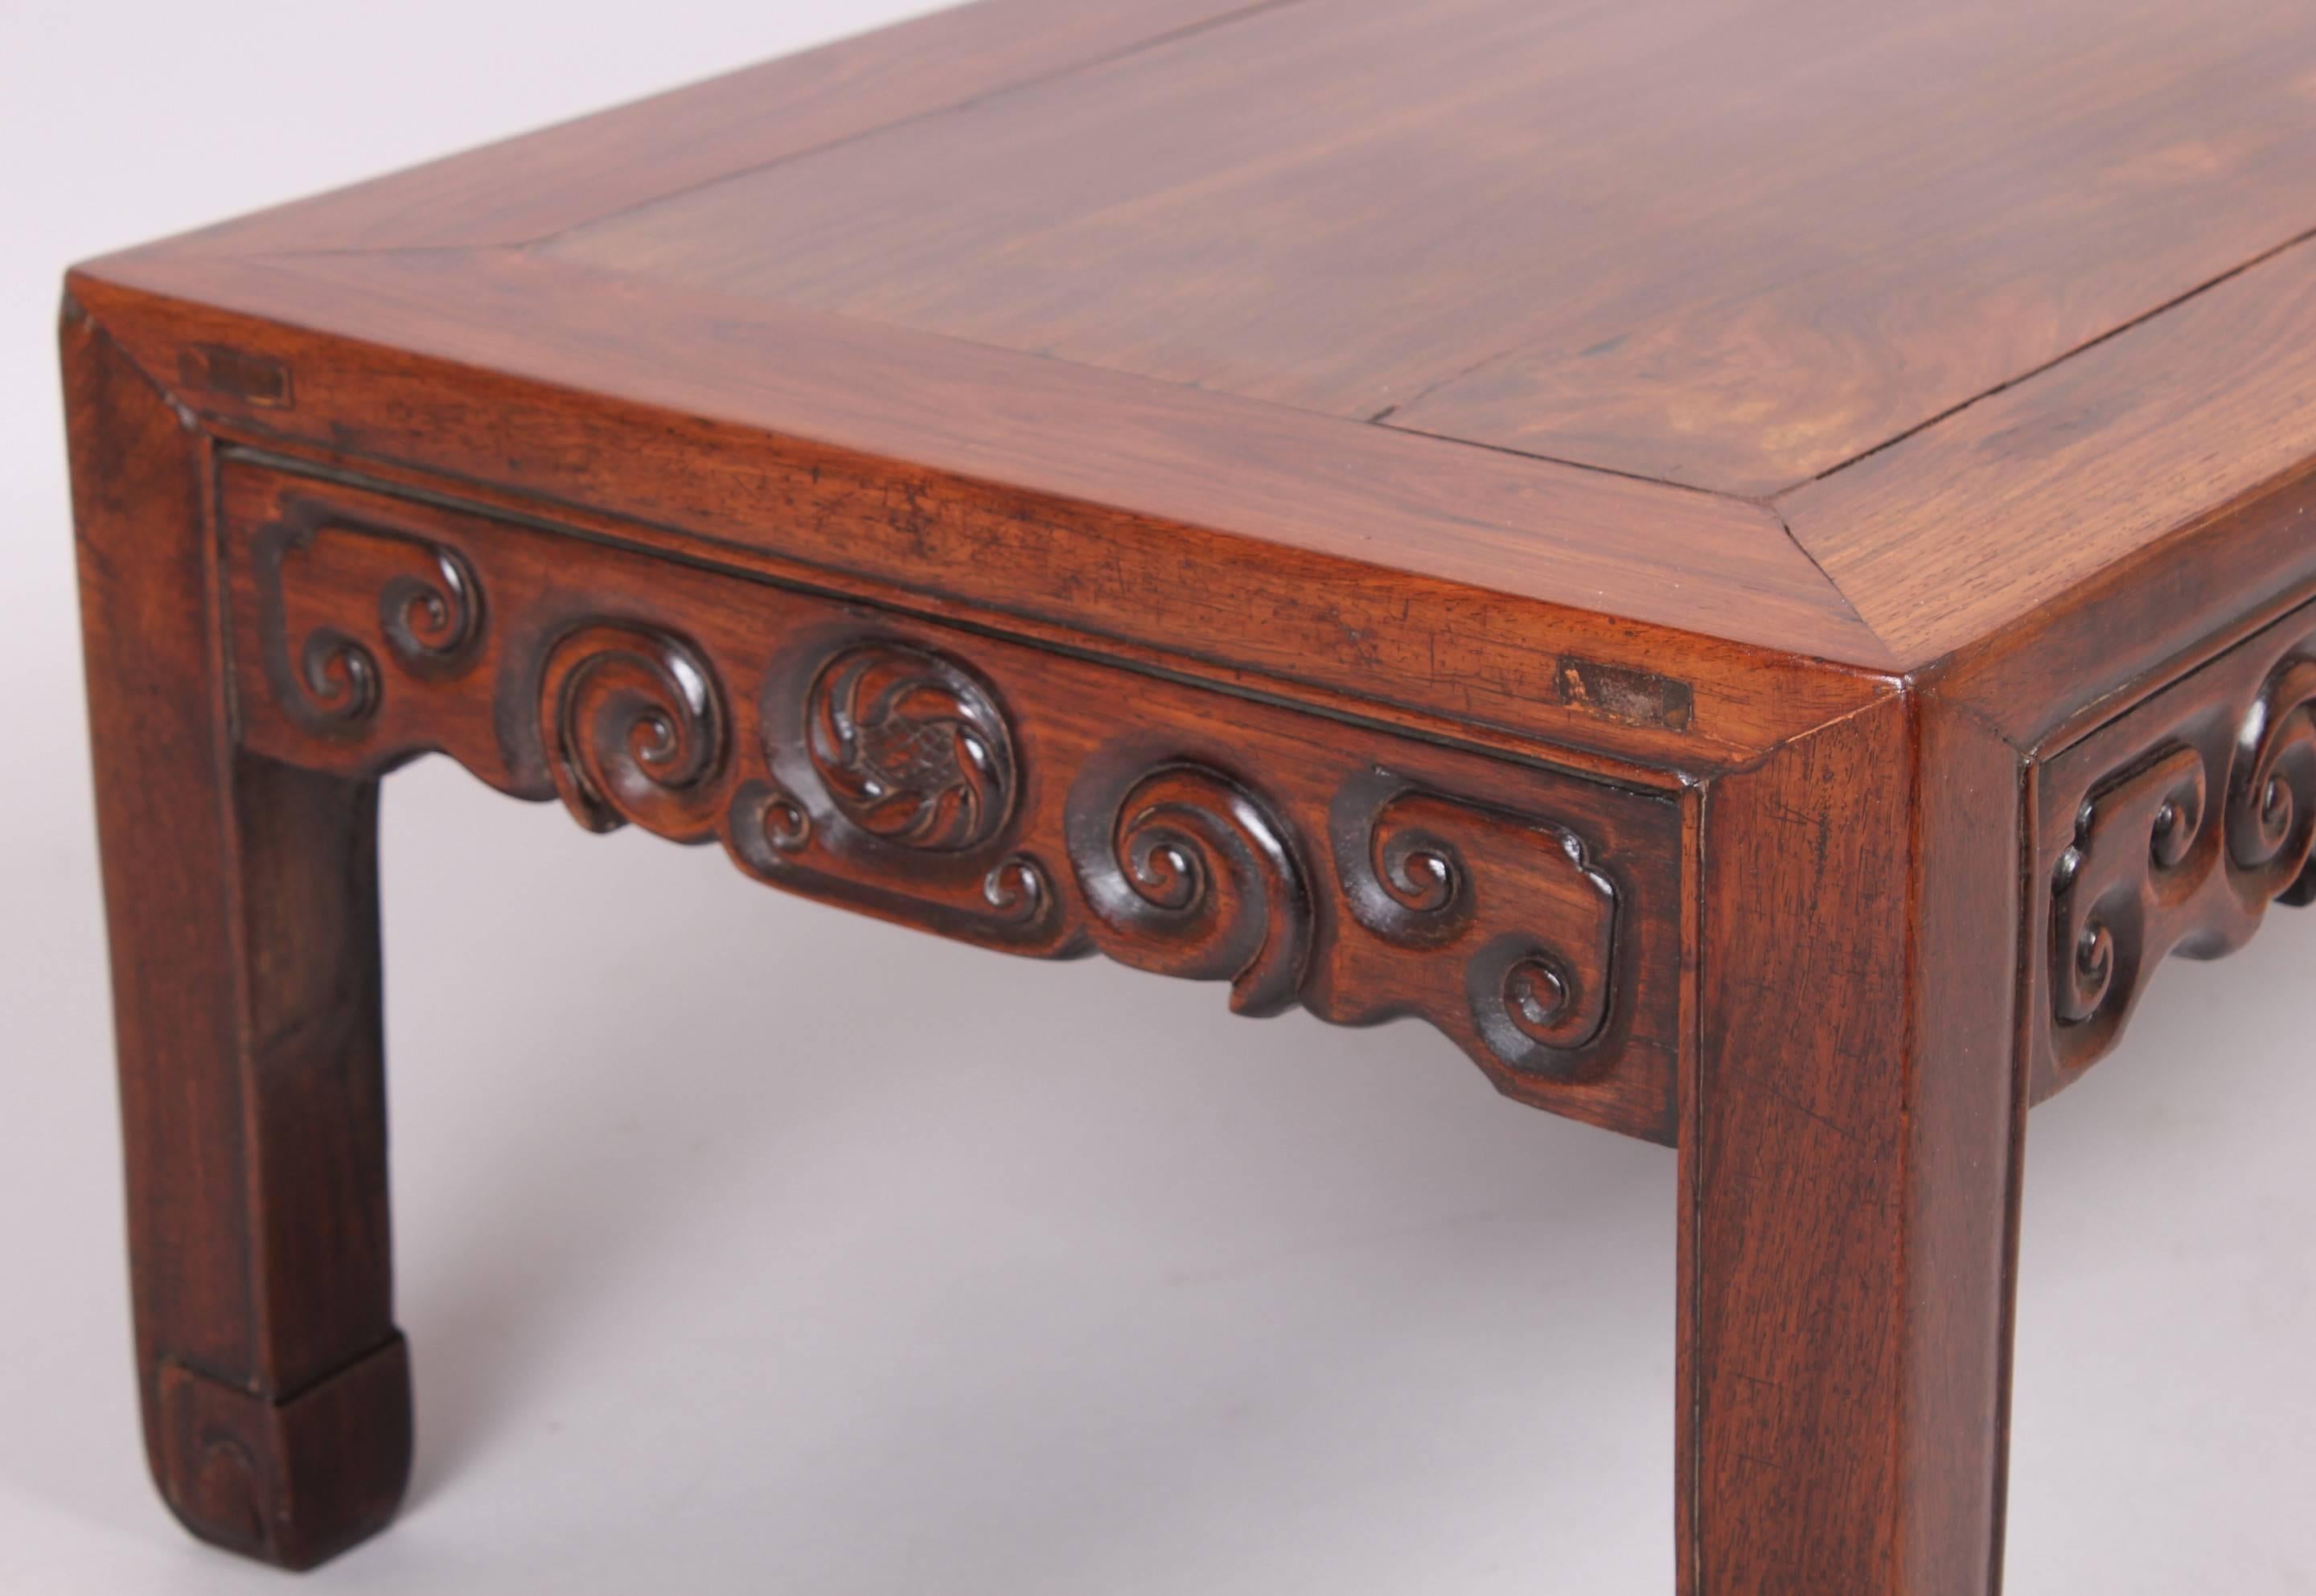 19th century Chinese hardwood, probably huanghuali, low tea-table; the cleated panel top mounted on a frame with carved traditional scrollwork motifs and on square legs.
 